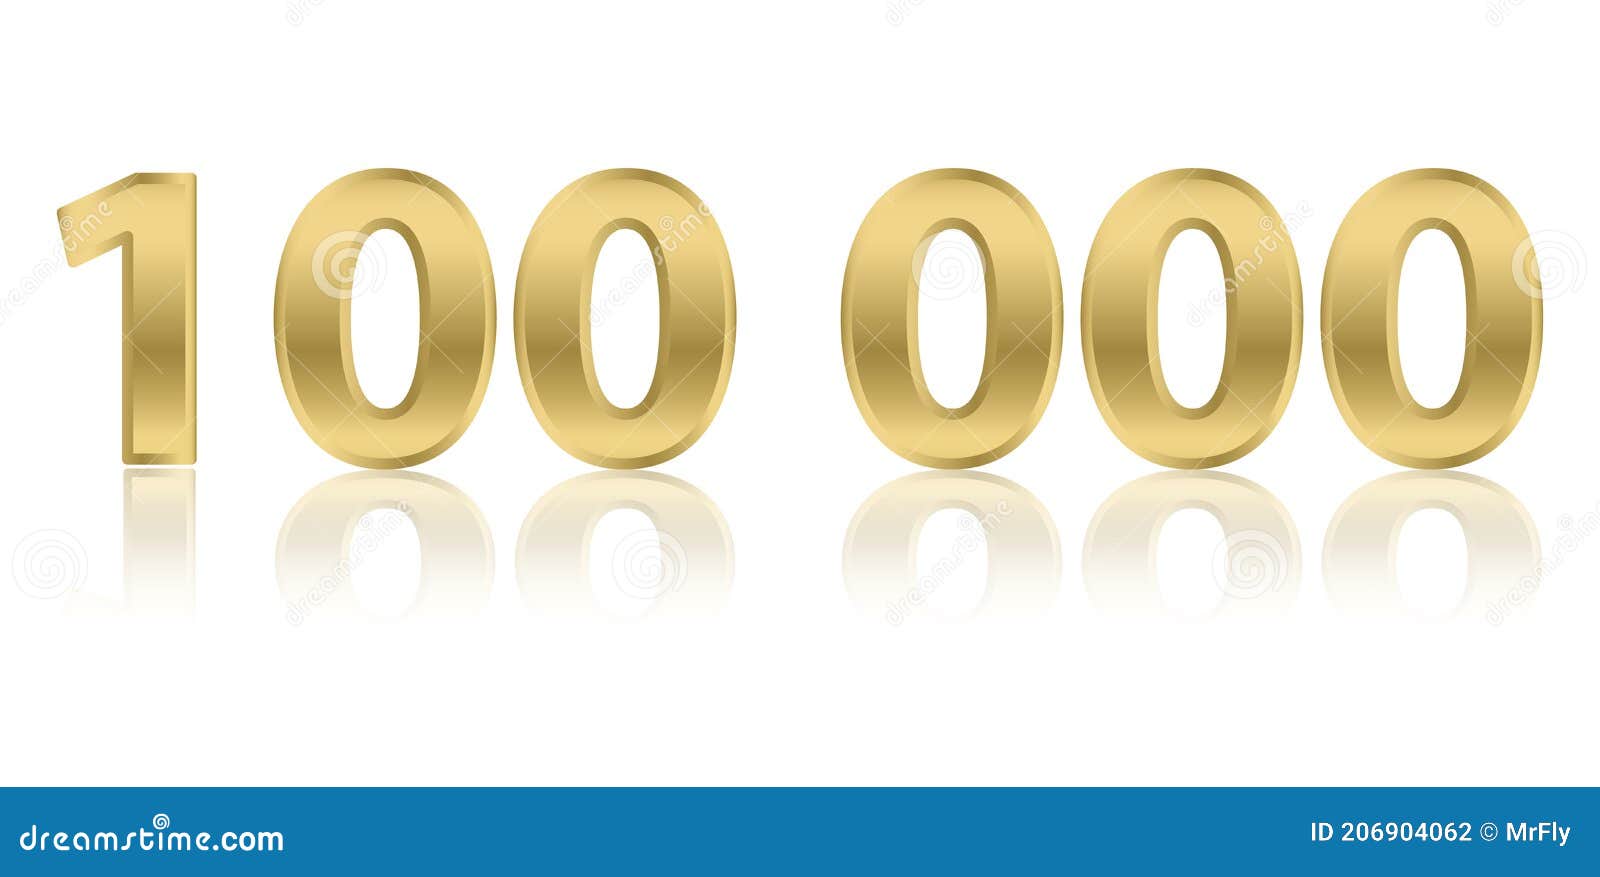 100,000 Closed Vector Images